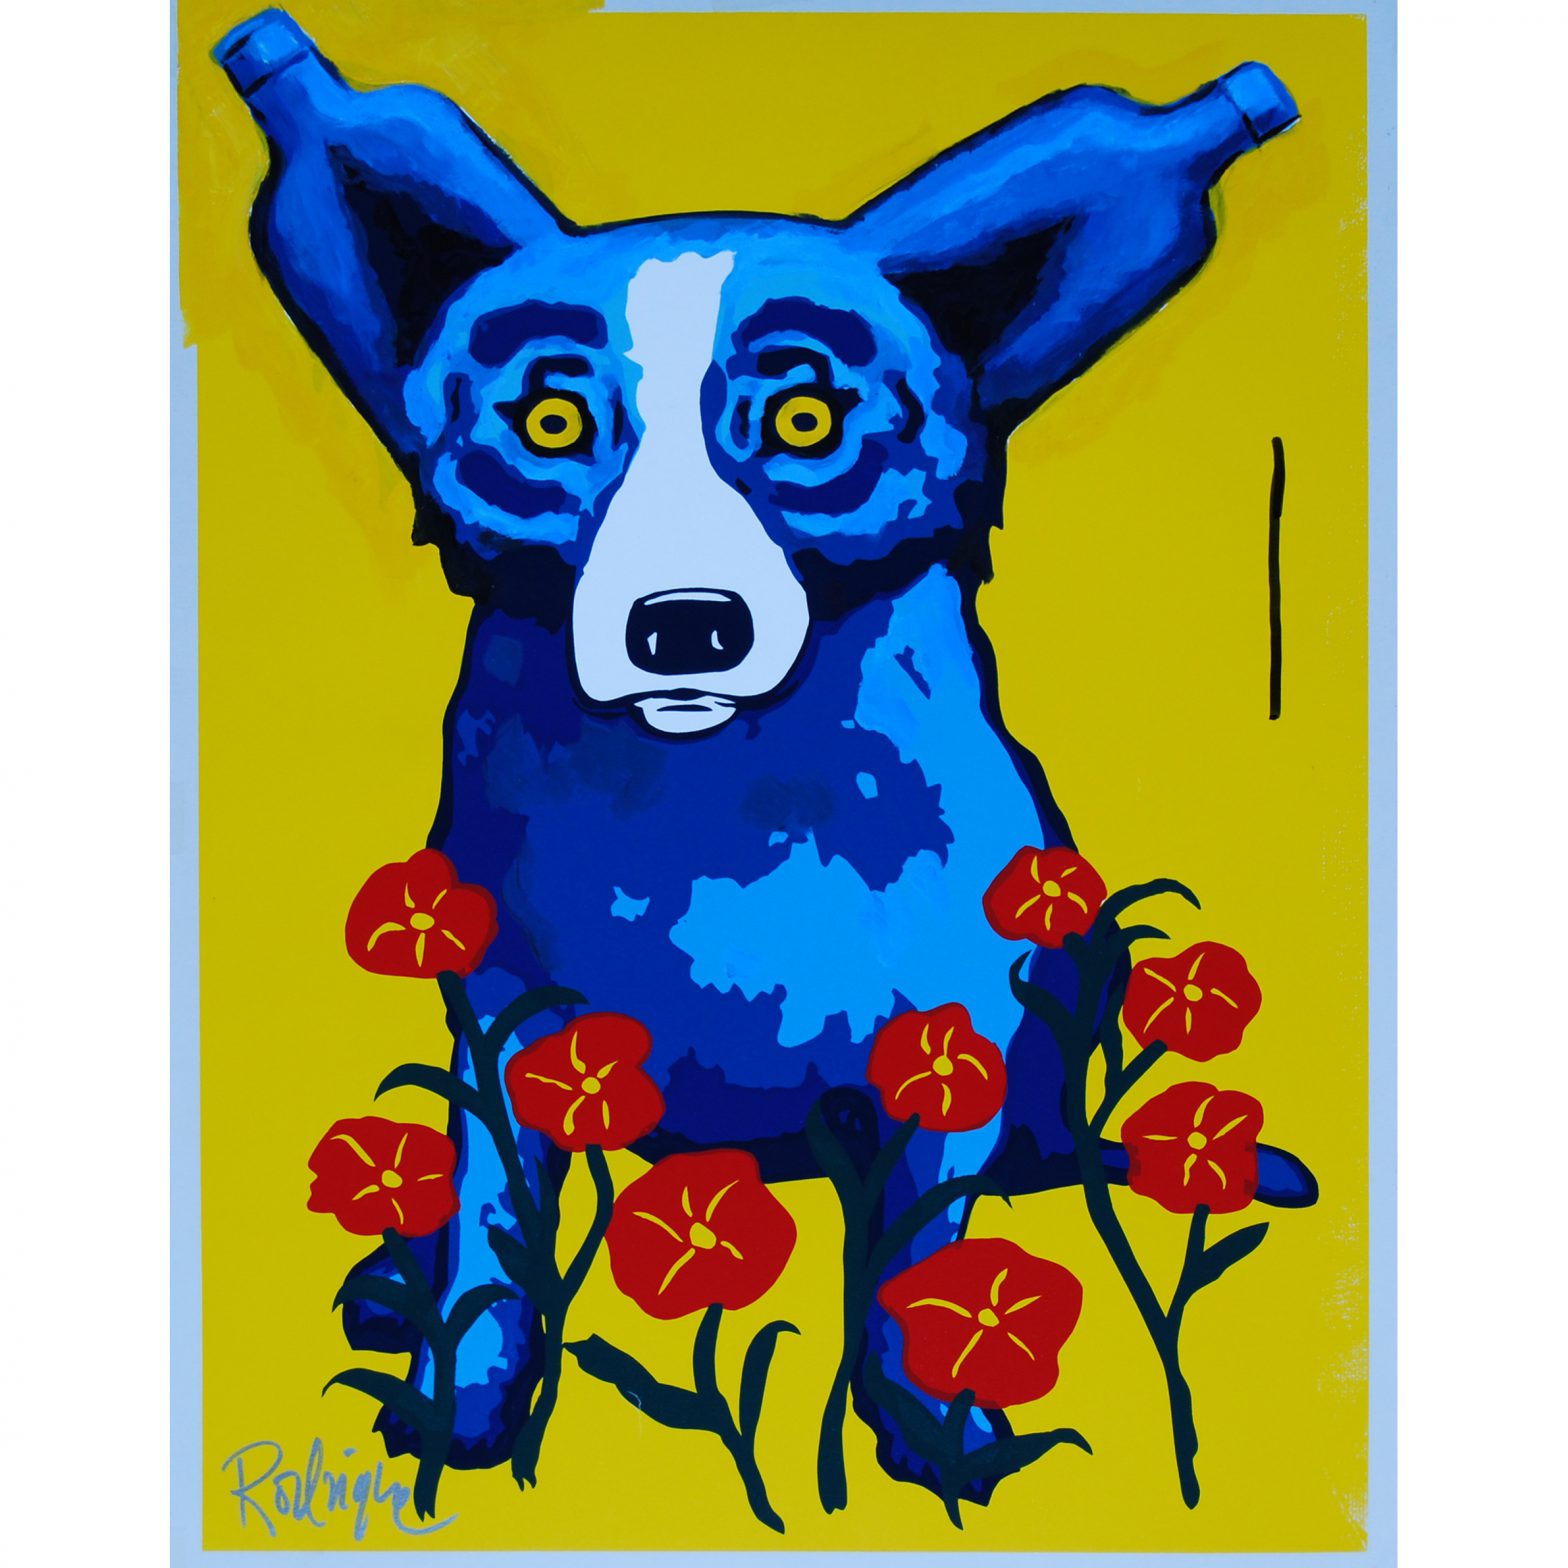 Original - Mixed Media - One of a Kind Concept Piece - Absolut Dog